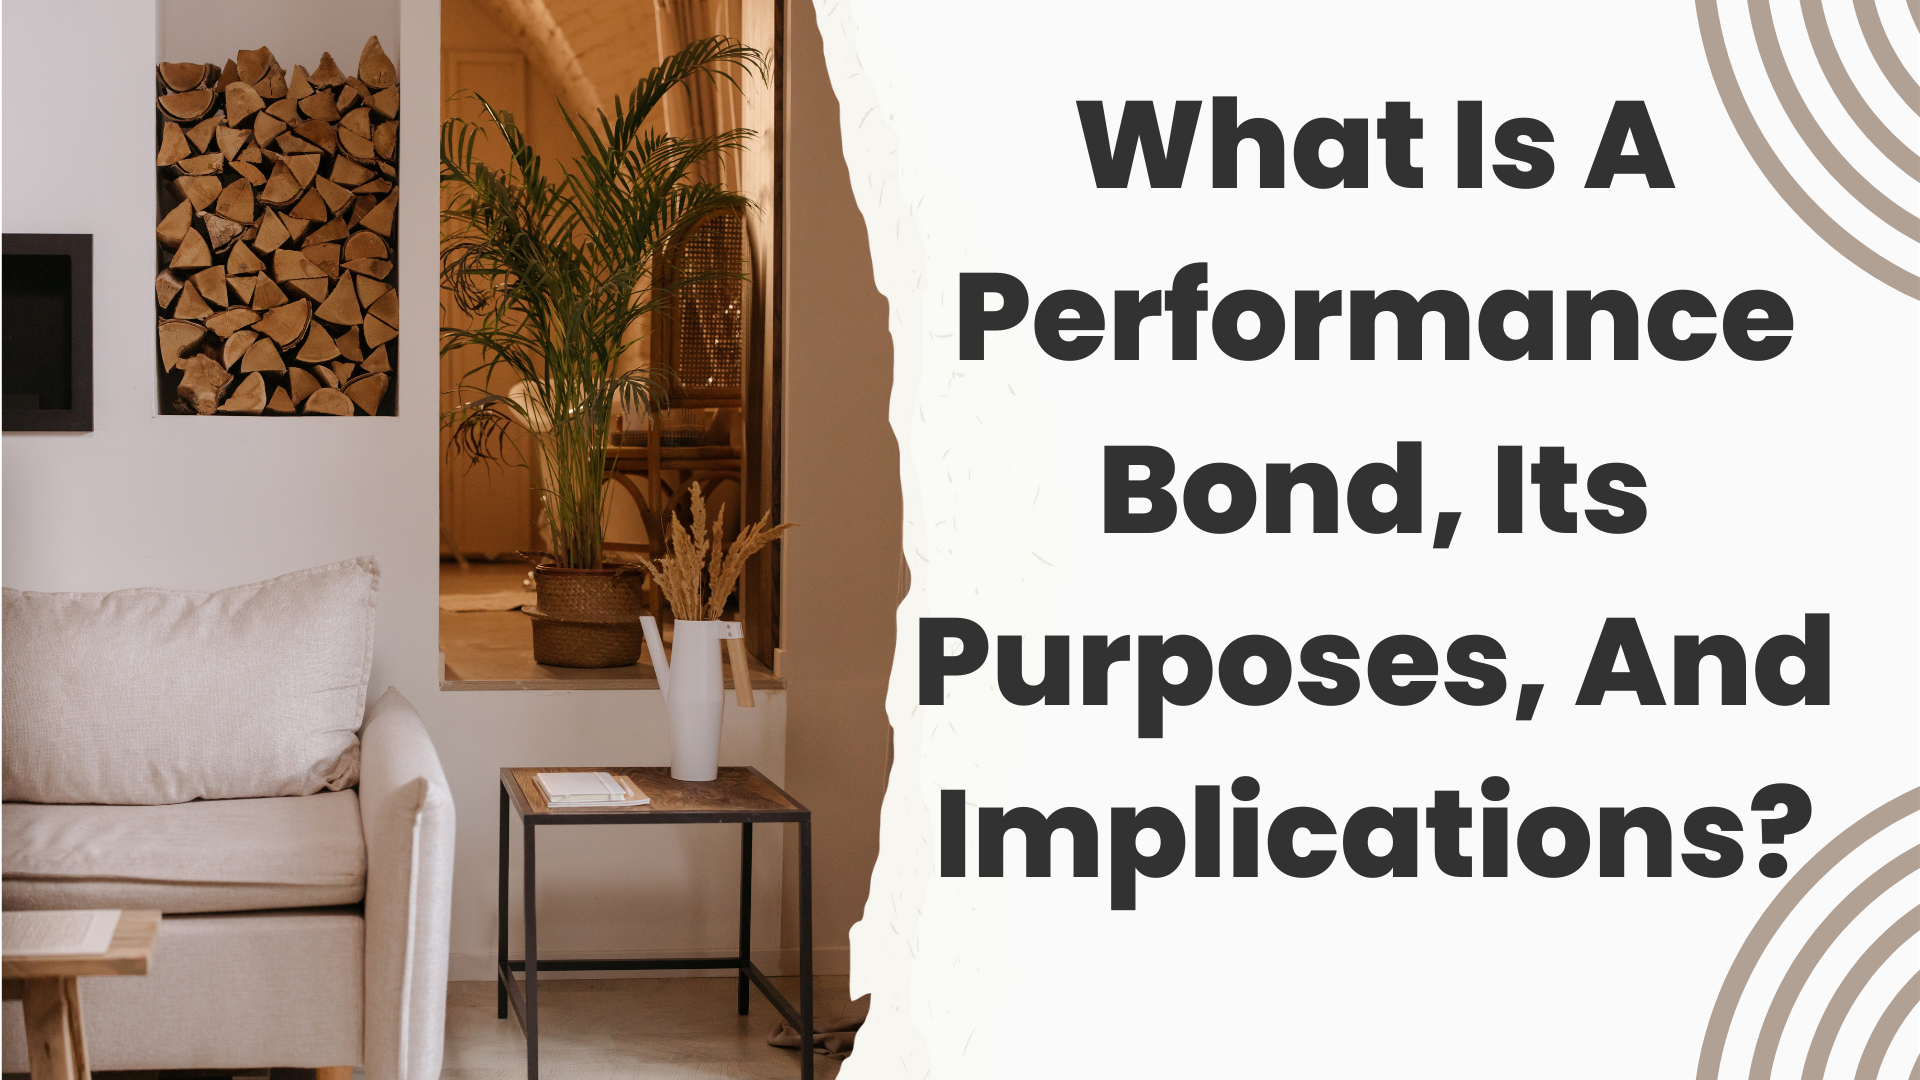 performance bond - What Is A Performance Bond, Its Purposes, And Implications? - cozy room